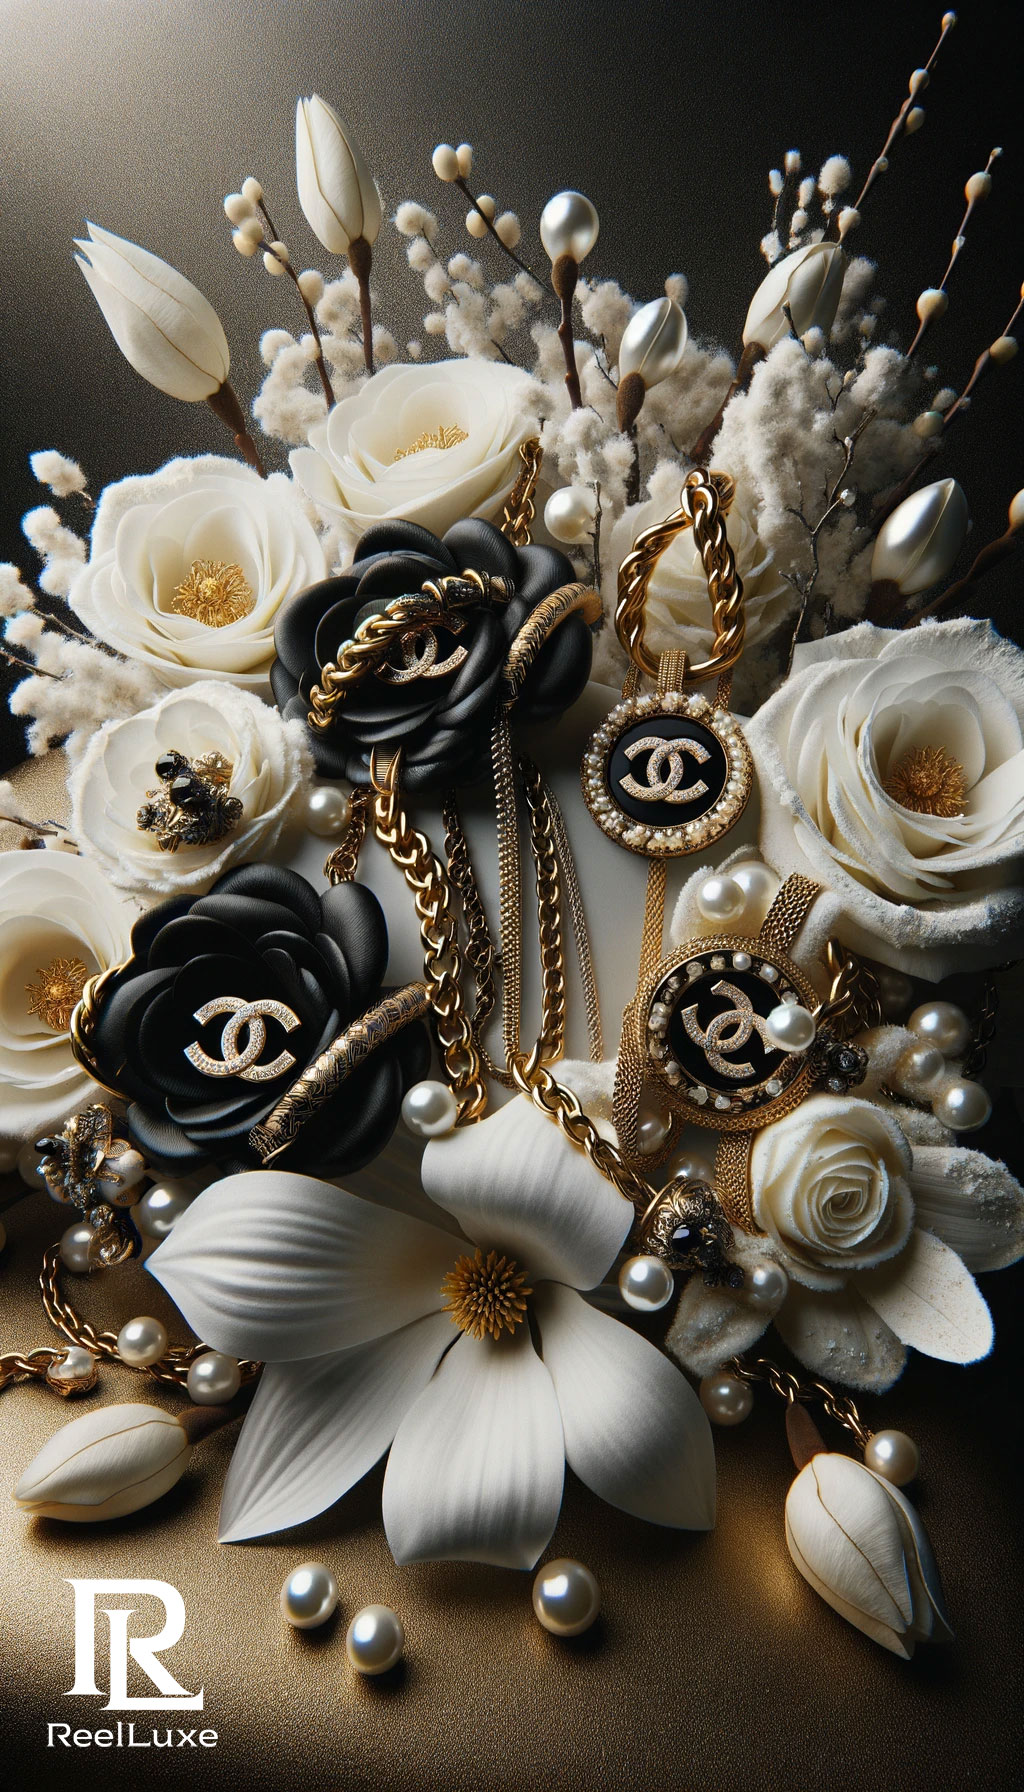 Romance in the Air: Stylish Valentine’s Day Gift Ideas – Chanel